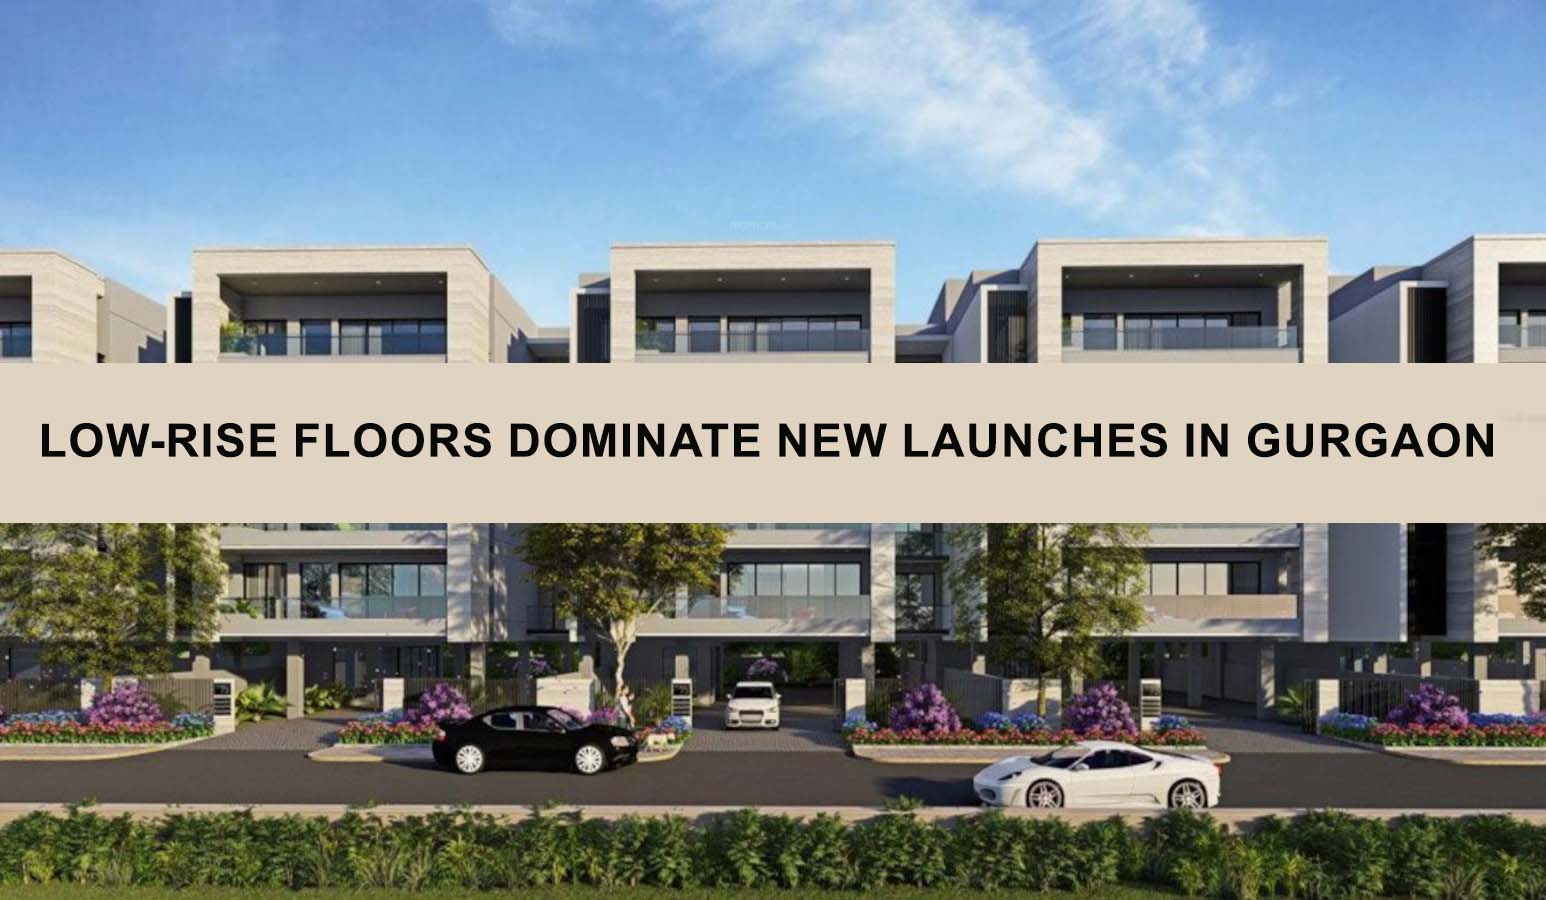 Low-Rise Floors Dominate New Launches in Gurgaon